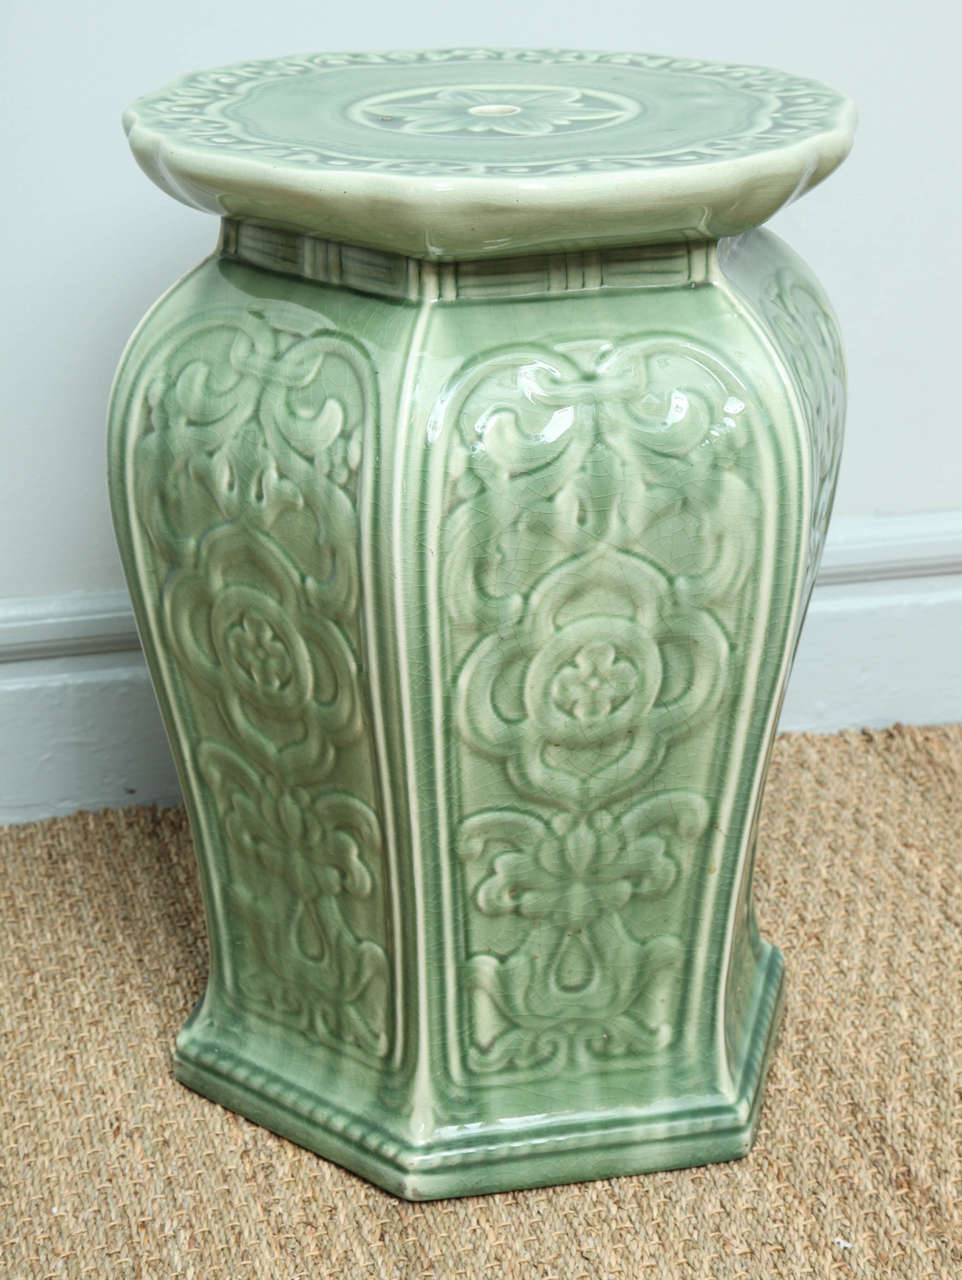 Very pretty and useful Celadon green garden seat by Minton, with stamp and registry mark to the underside, the exterior with foliate and lotus flower decoration.